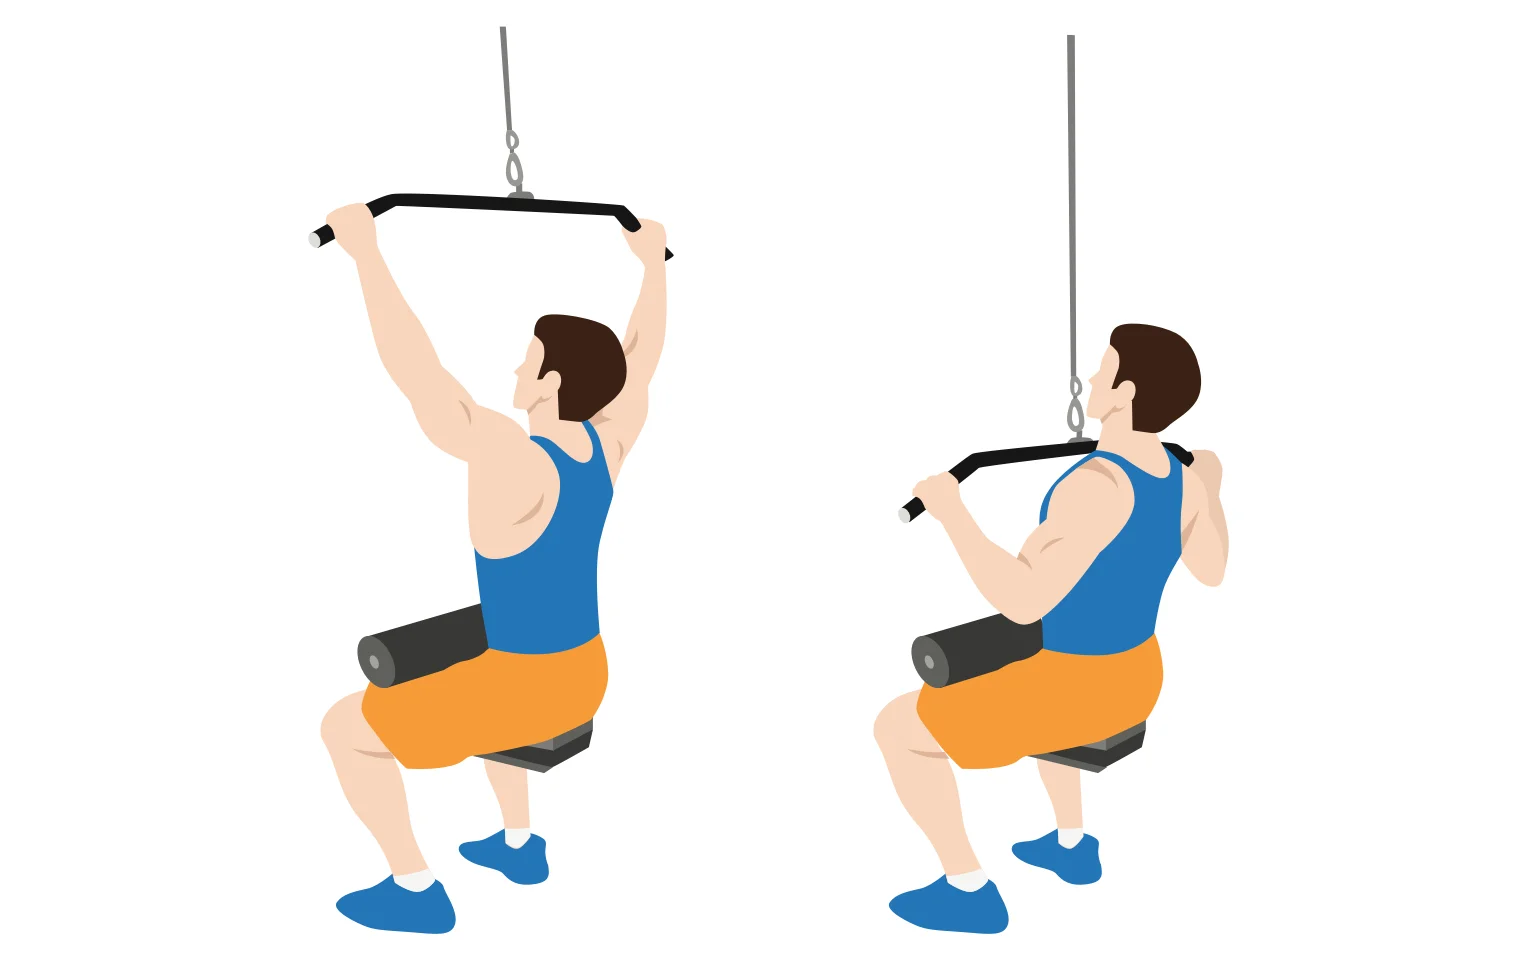 Diagram showing lat pulldowns, one of the pull day exercises